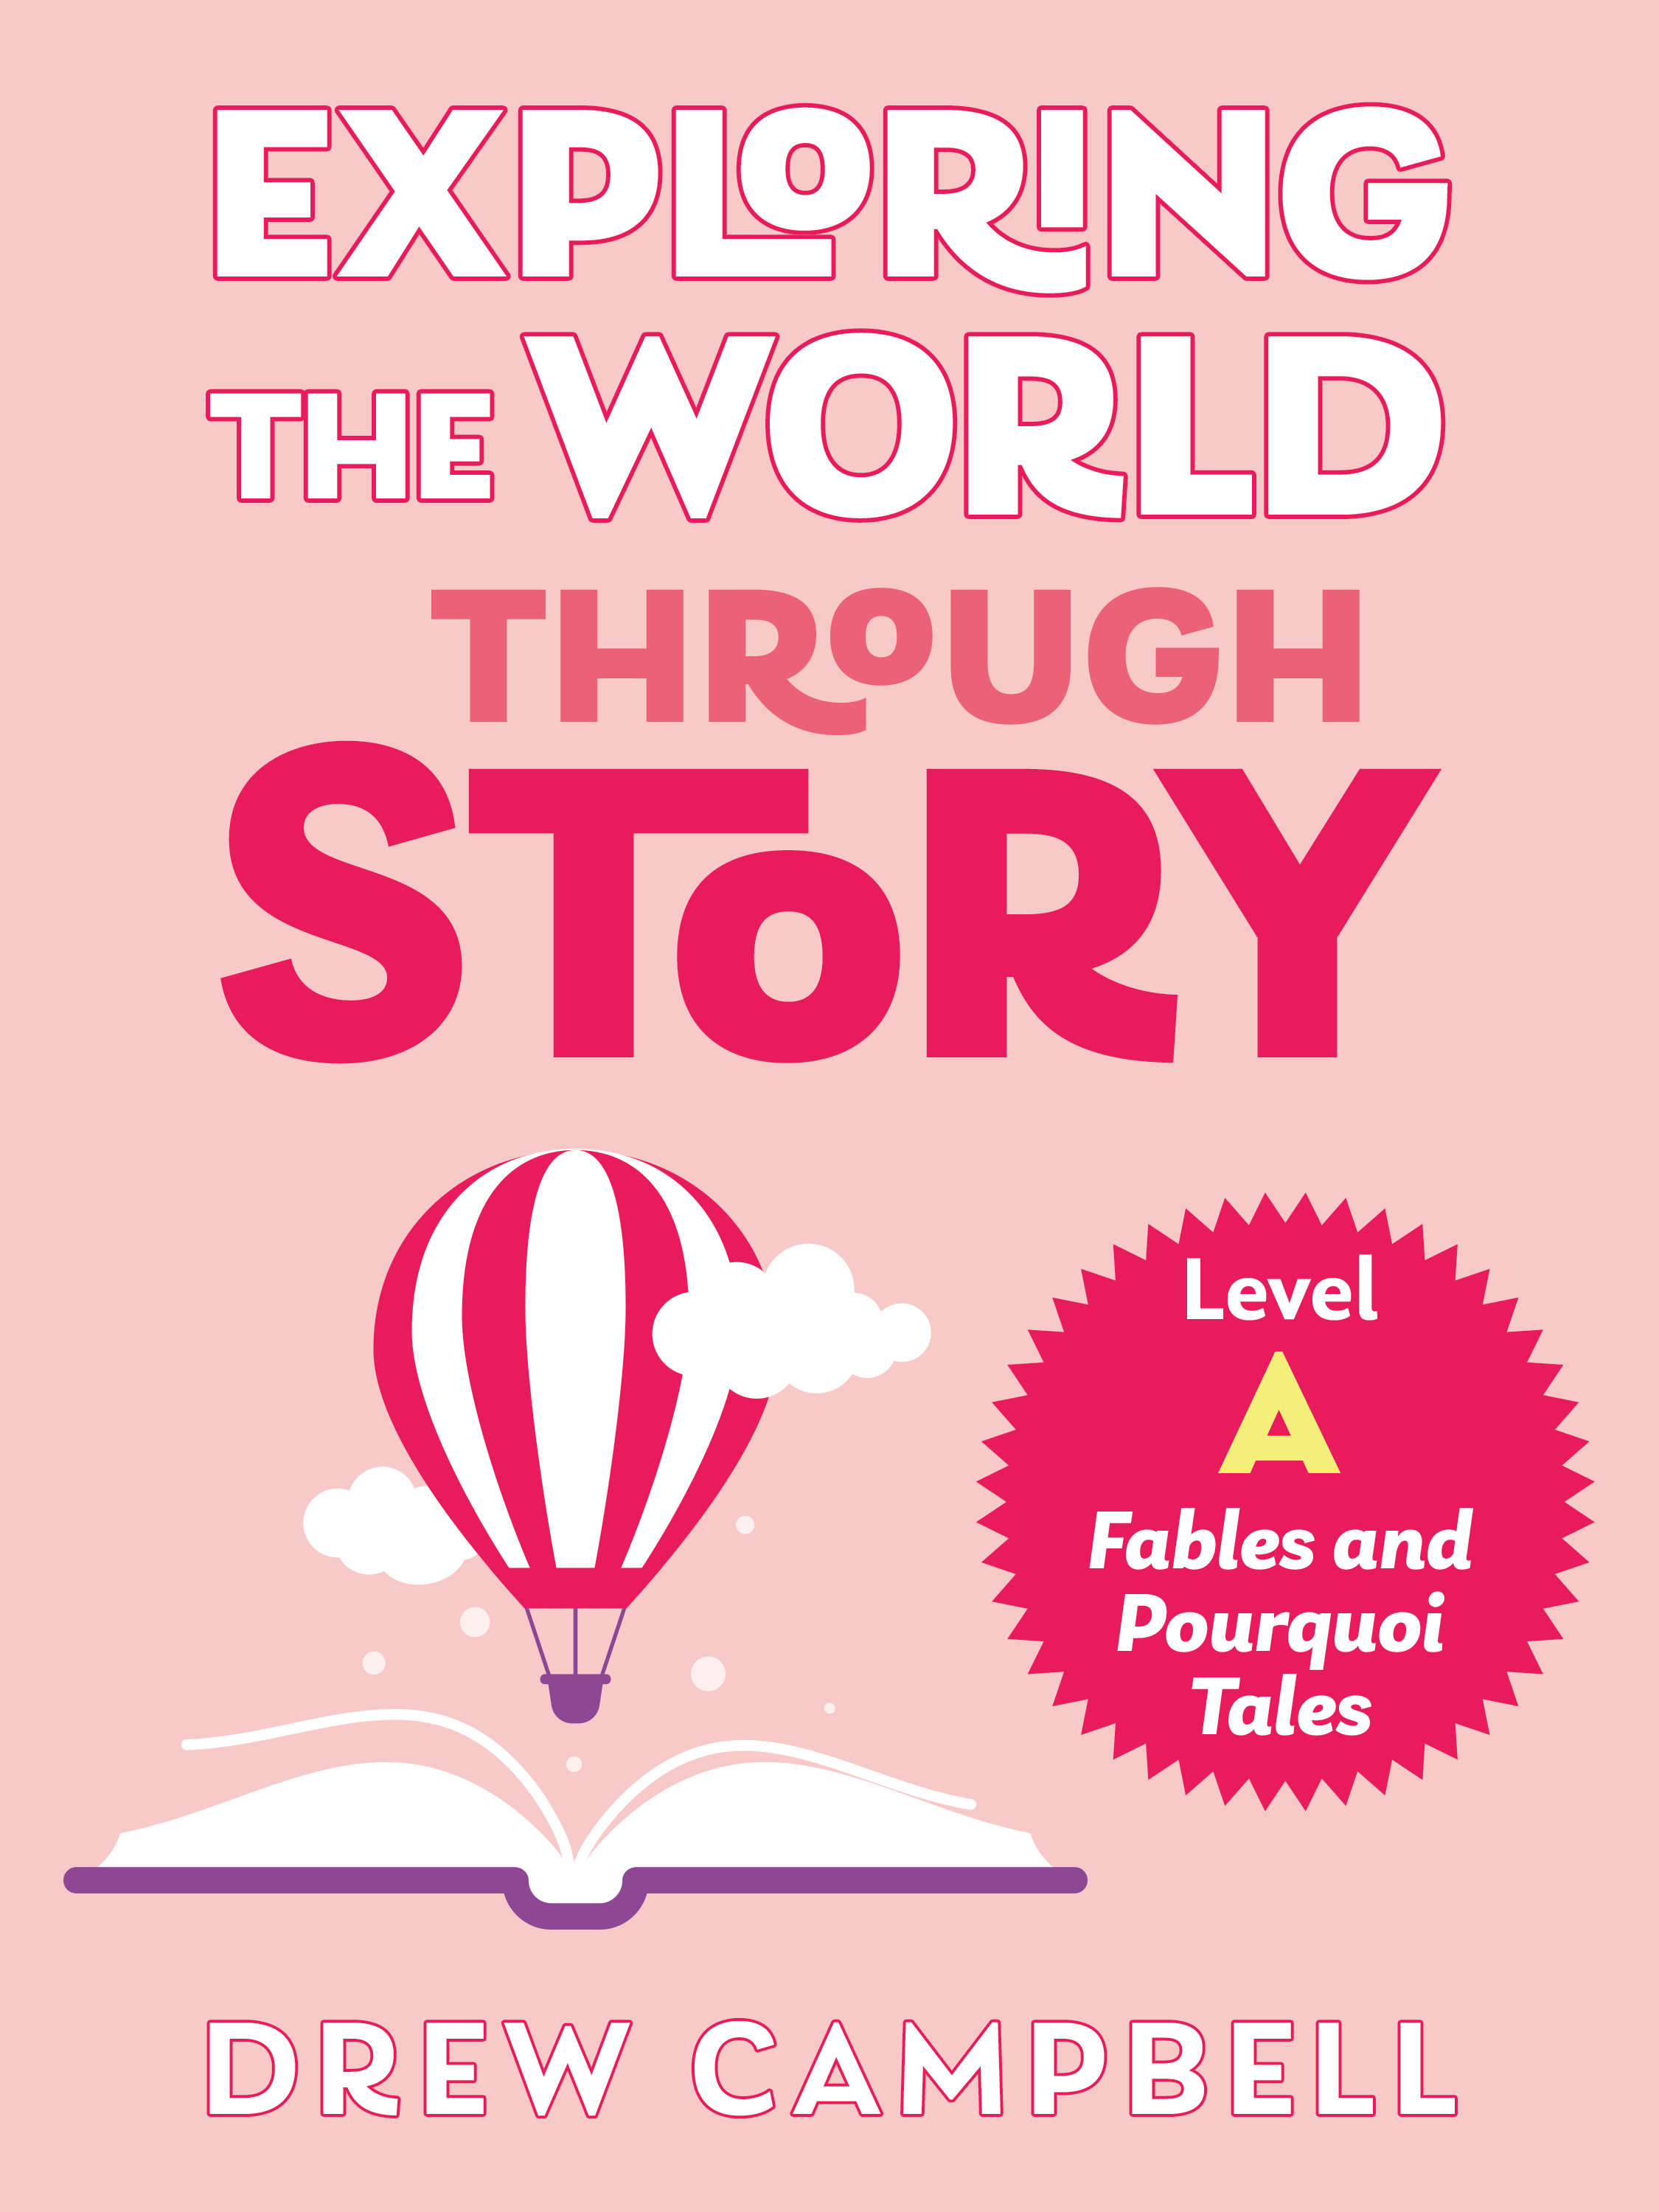 Exploring the World through Story, Level A